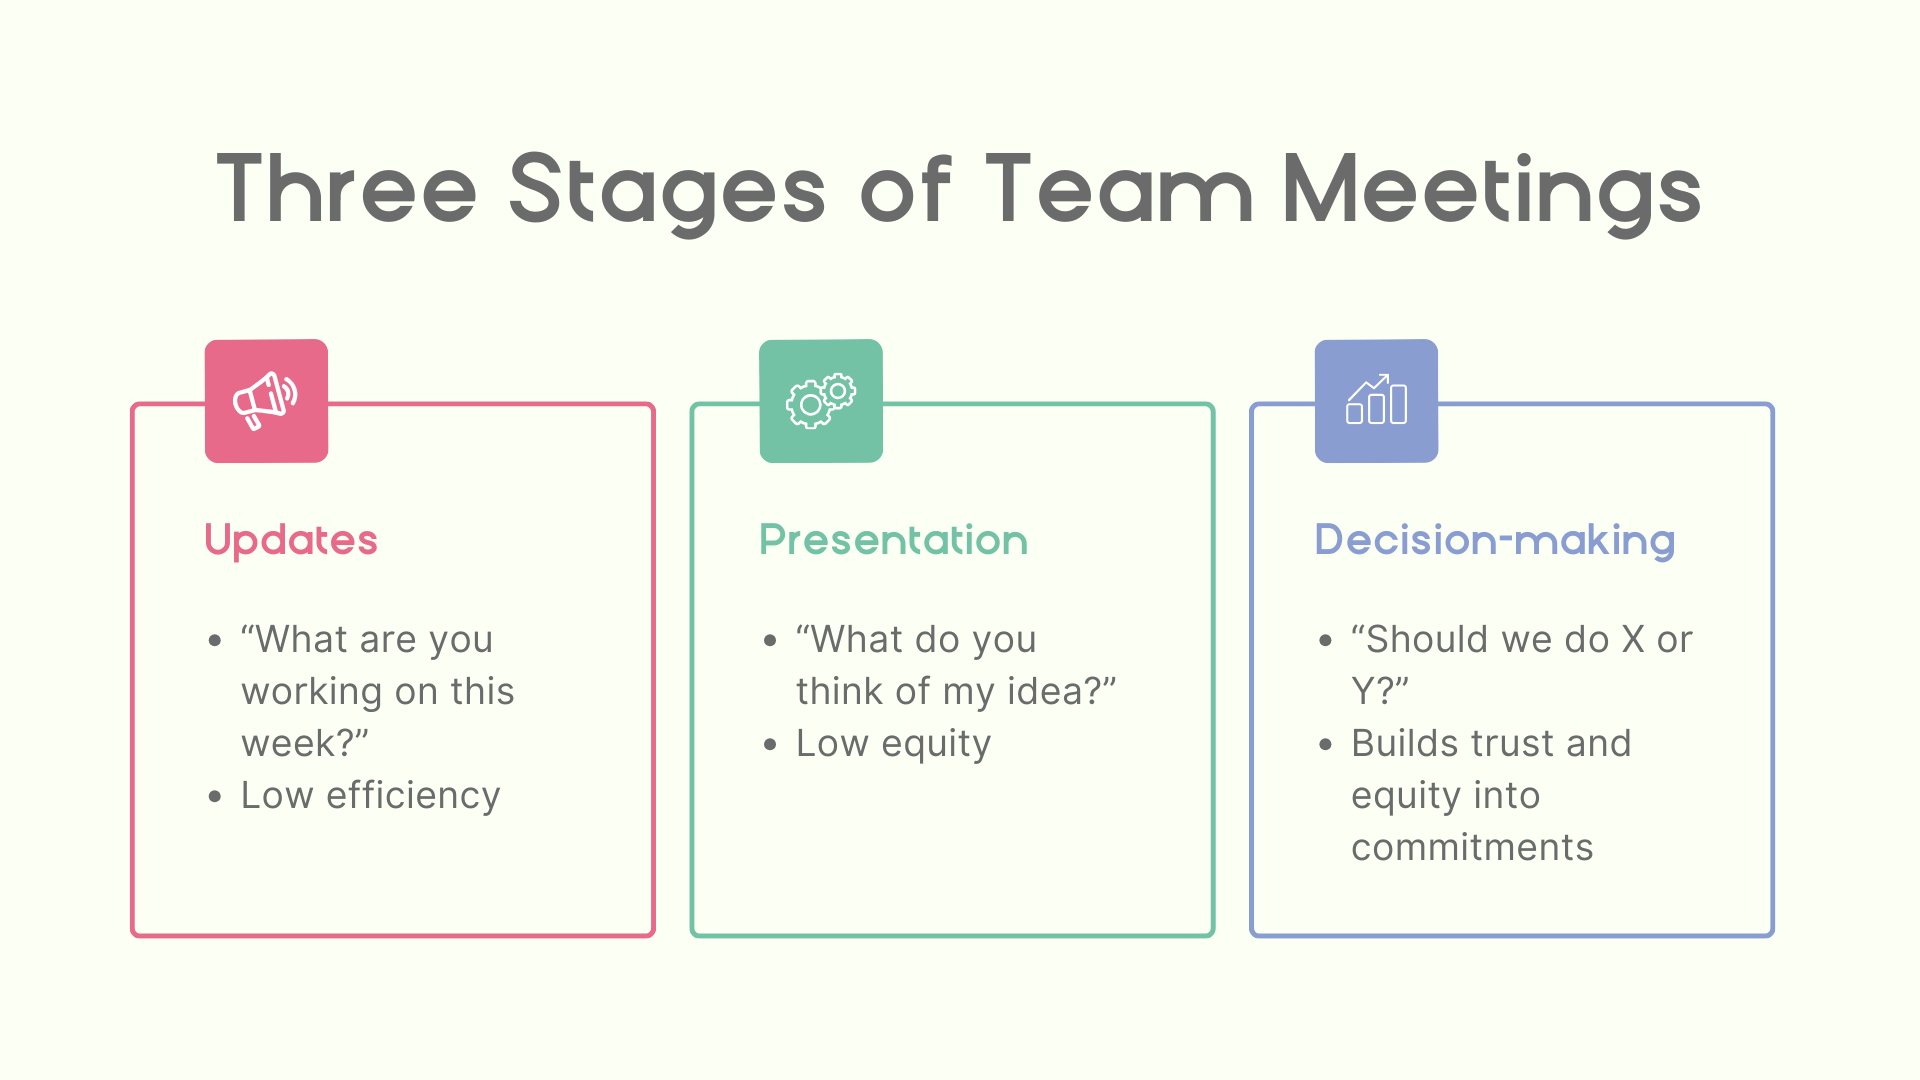 Meetings consist of updates, presentation, and decision-making